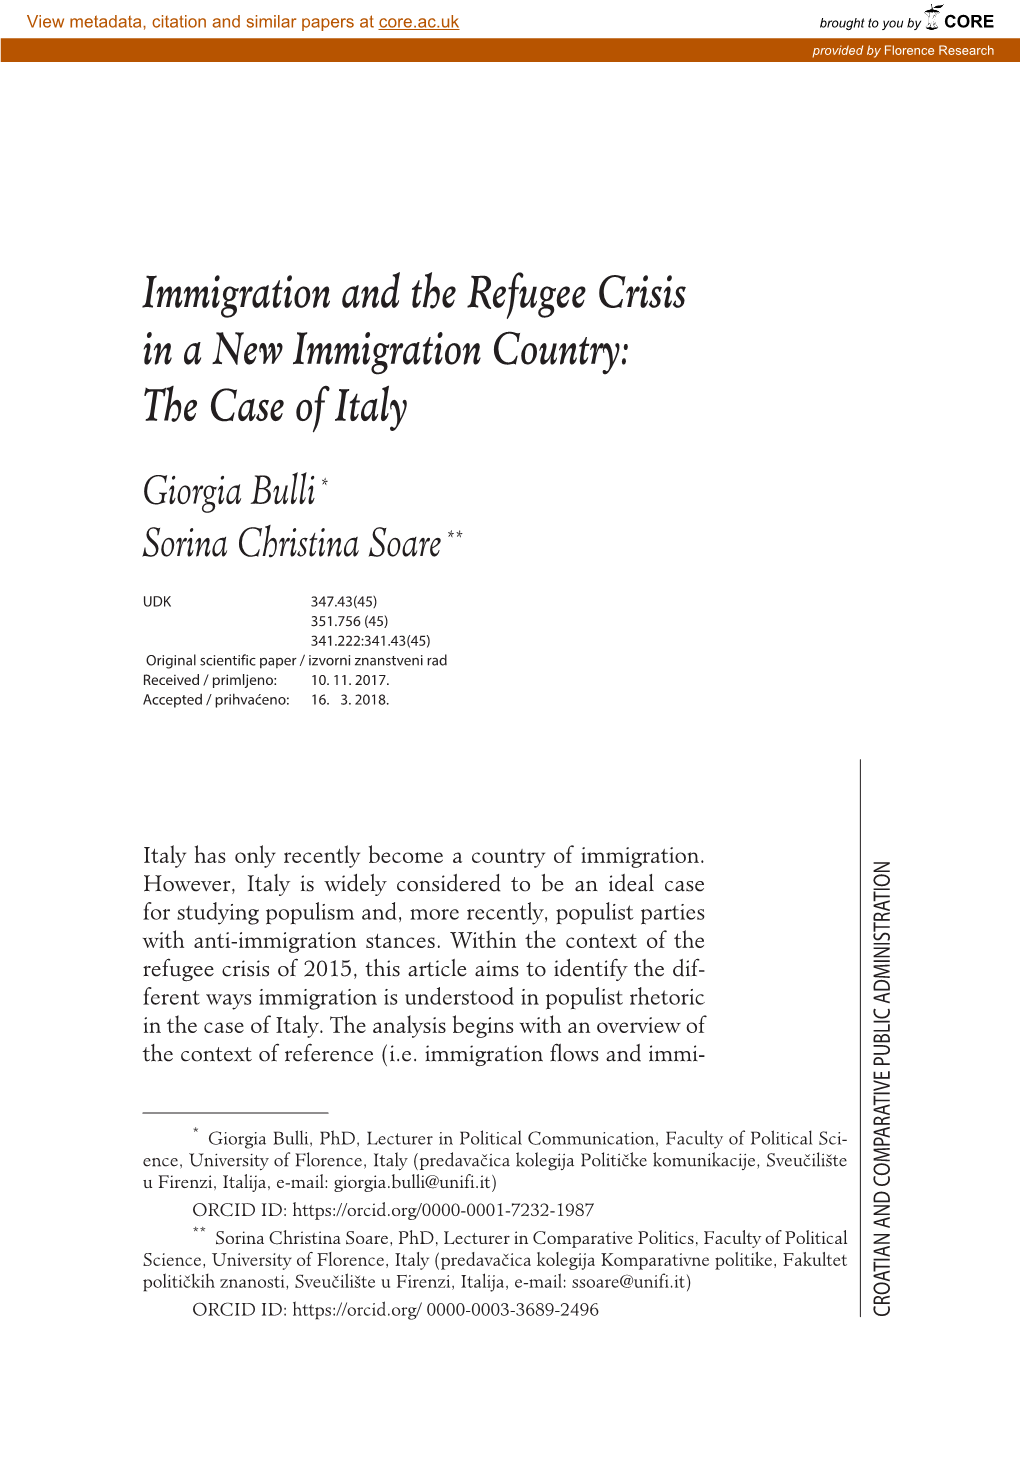 Immigration and the Refugee Crisis in a New Immigration Country: the Case of Italy